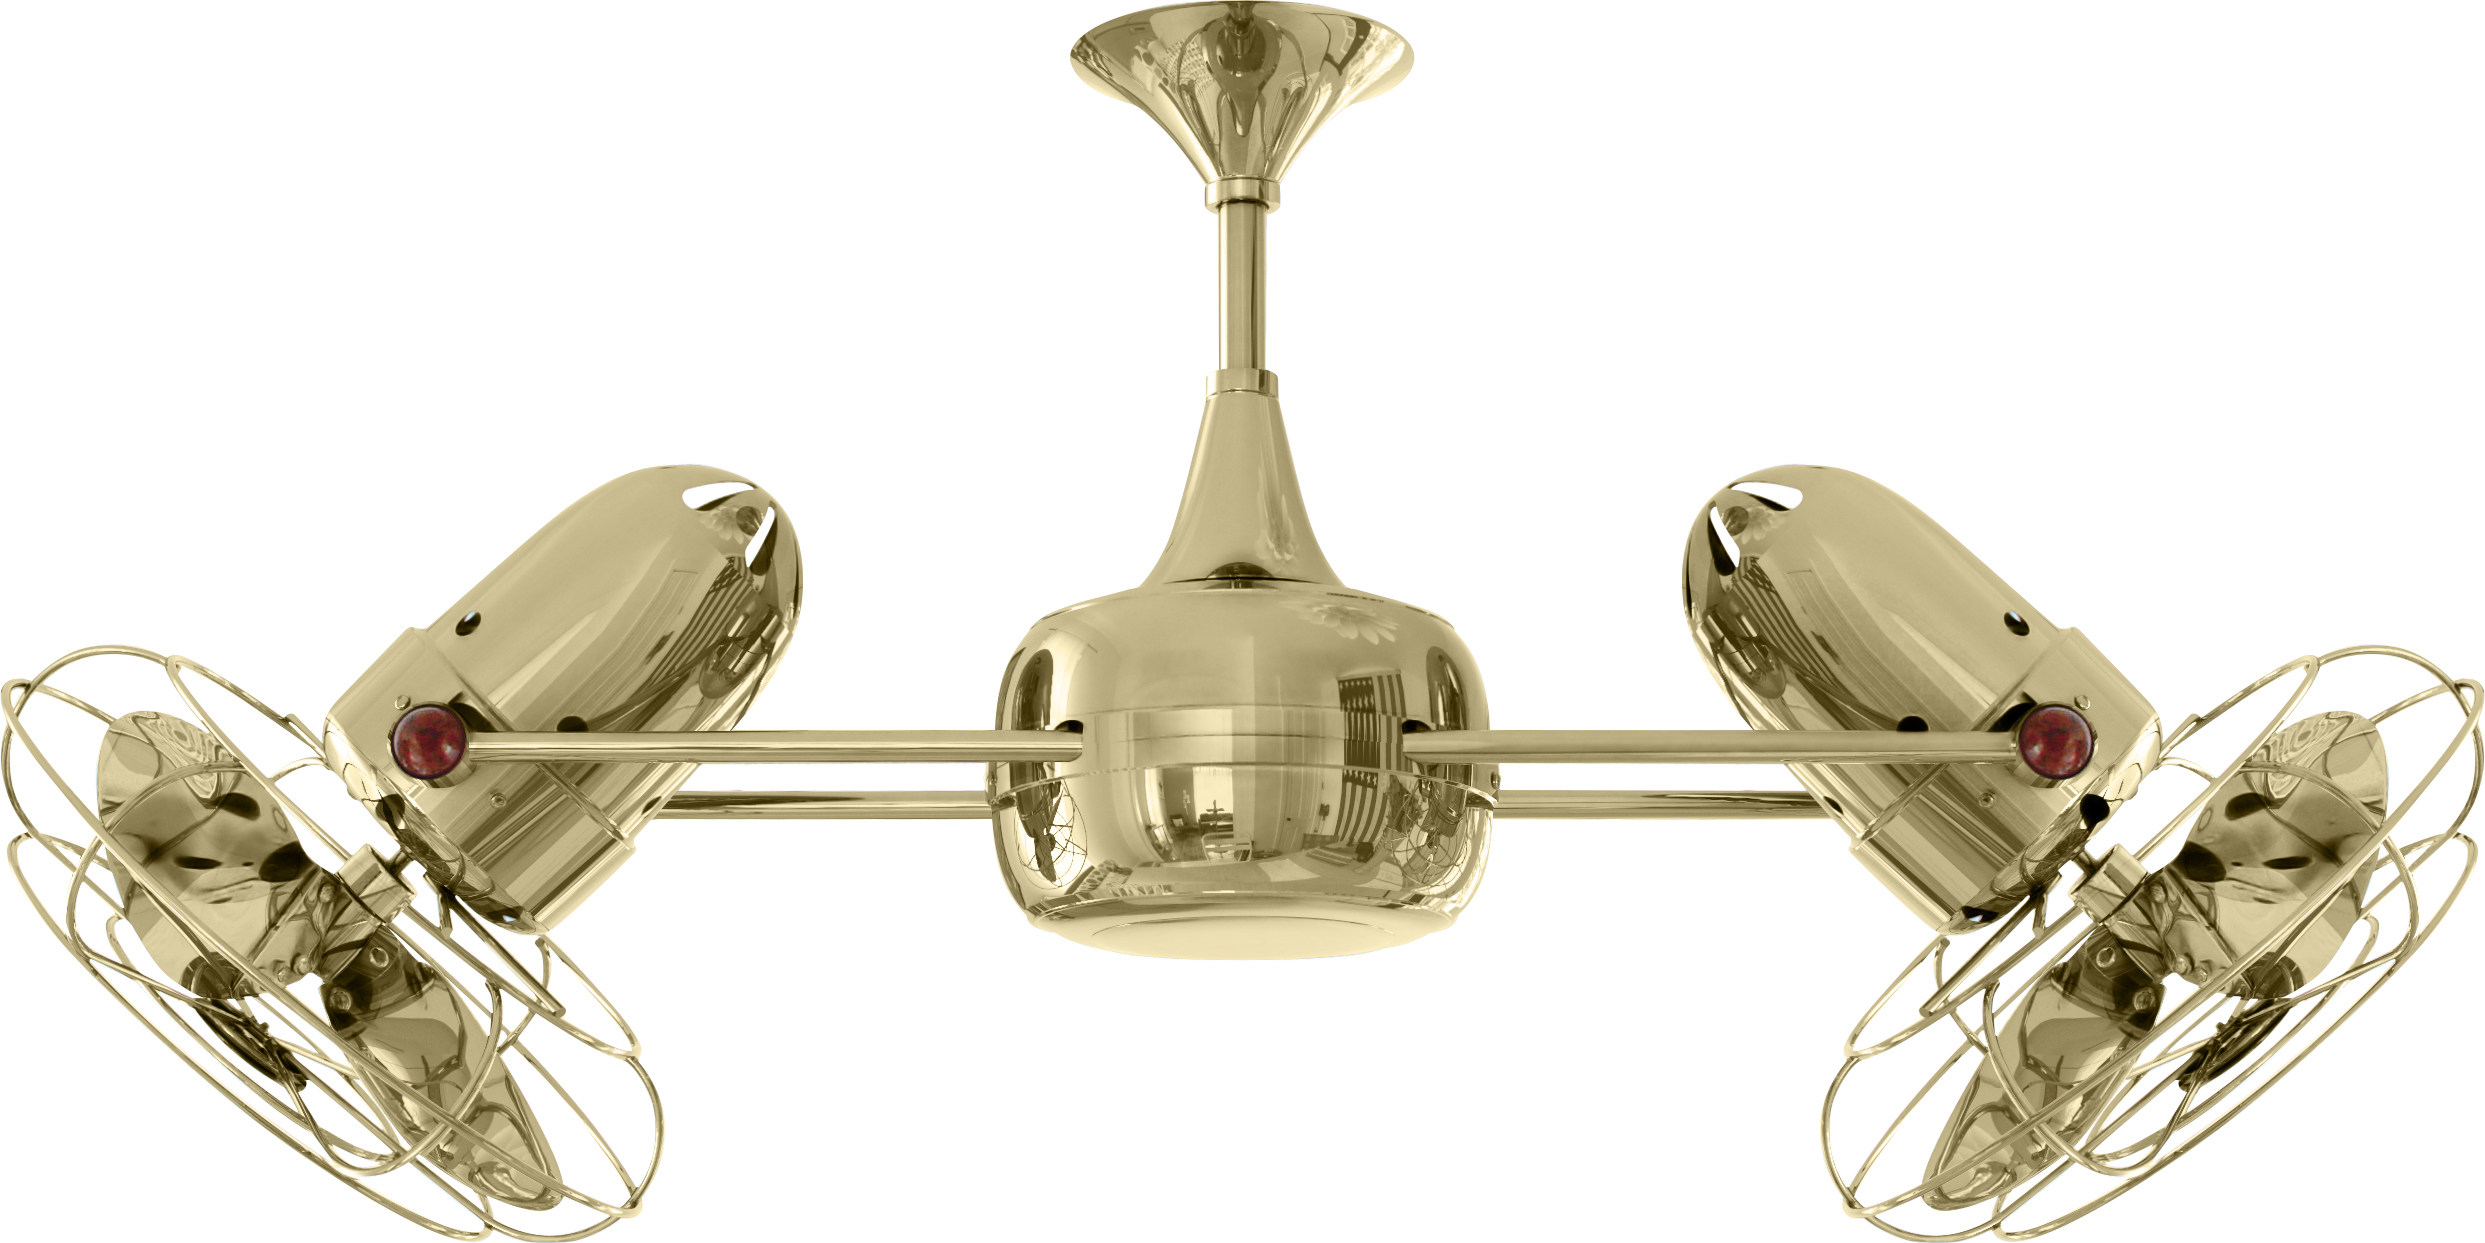 Duplo Dinamico rotational dual head ceiling fan in Polished Brass finish with metal blades in decorative cage made by Matthews Fan Company.